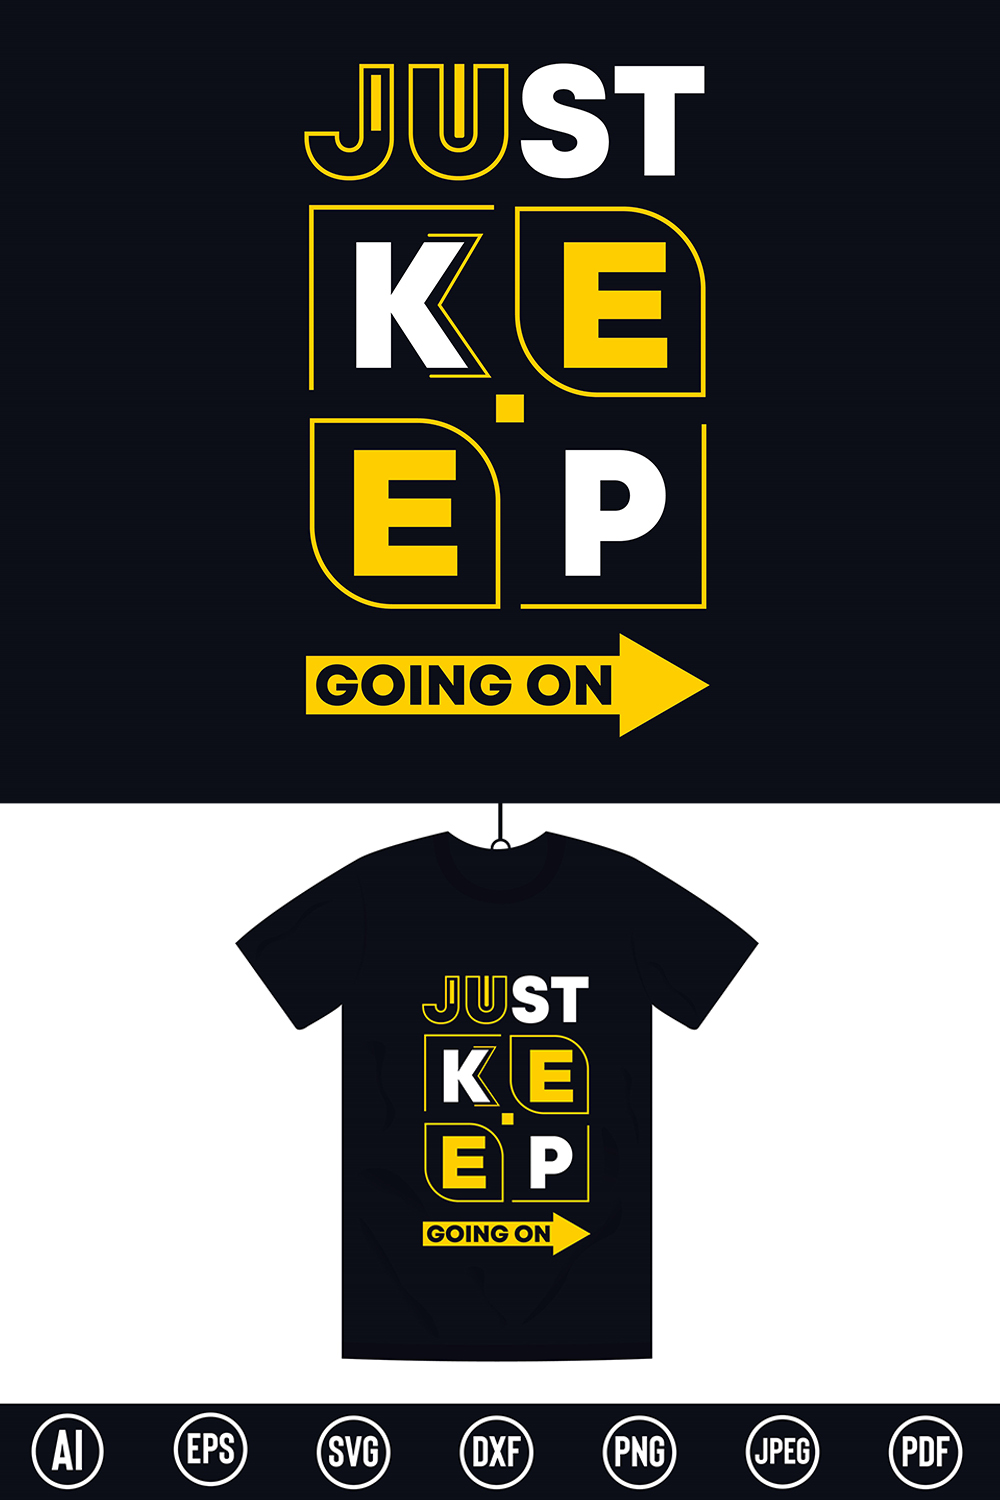 Modern Typography T-Shirt design with “Just keep going on” quote for t-shirt, posters, stickers, mug prints, banners, gift cards, labels etc pinterest preview image.